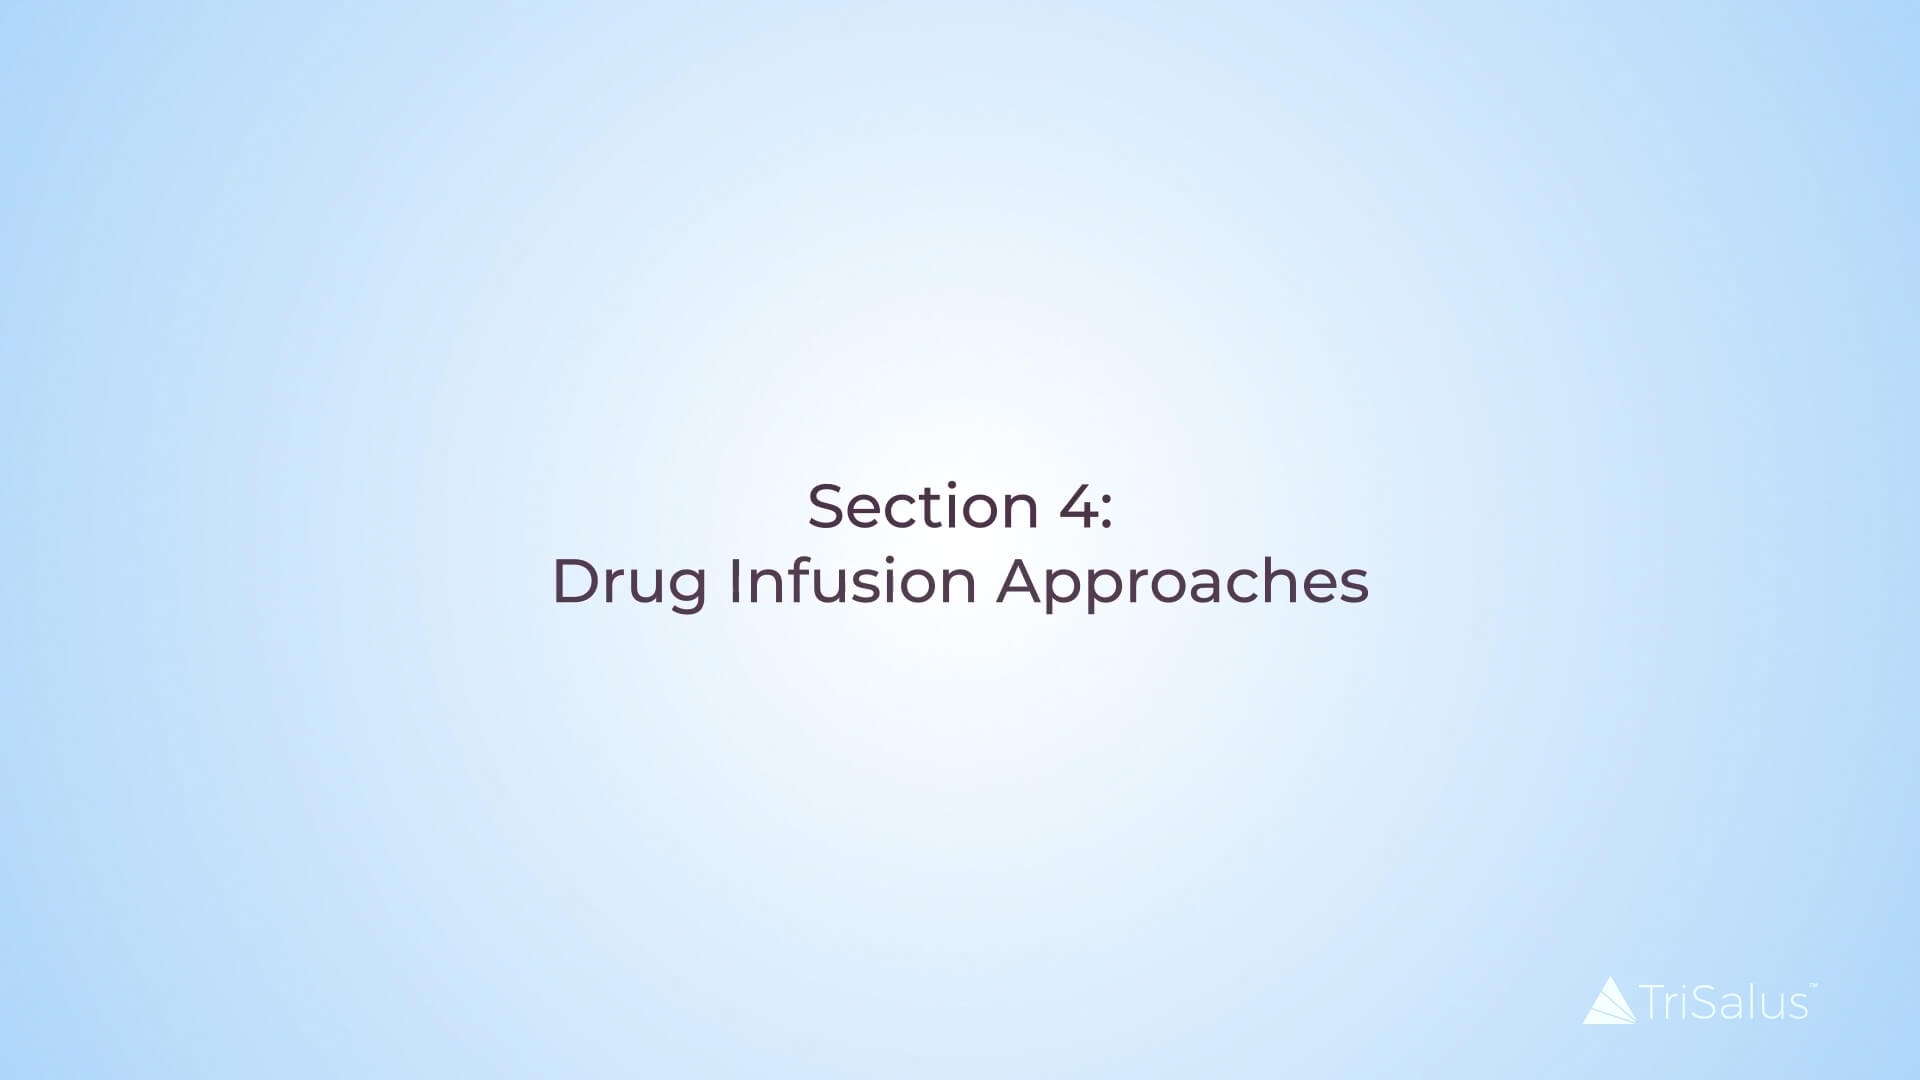 Video Thumbnail with text: Section 4: Drug Infusion Approaches